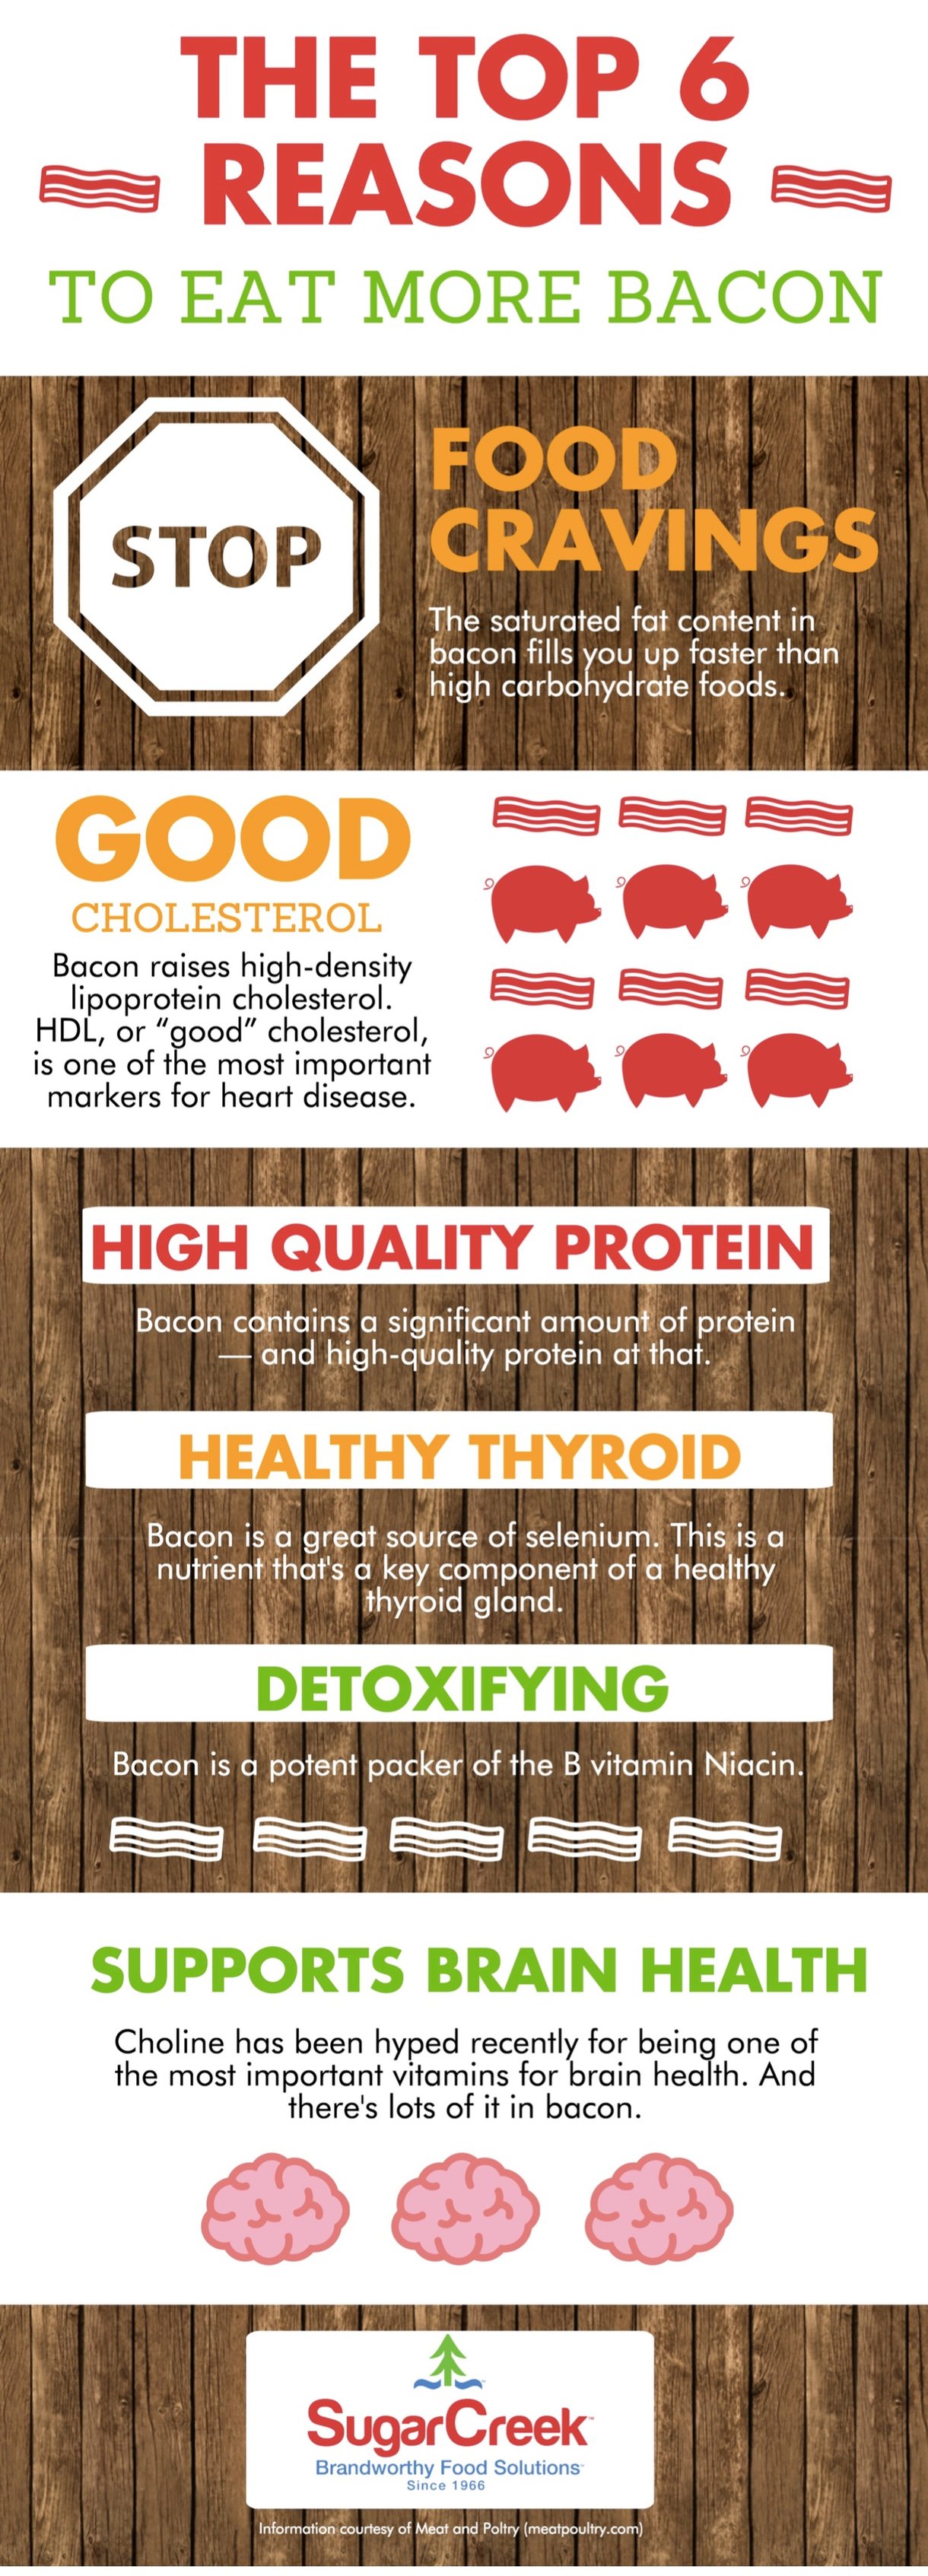 SugarCreek_Reasons_to_Eat_More_Bacon_Infographic